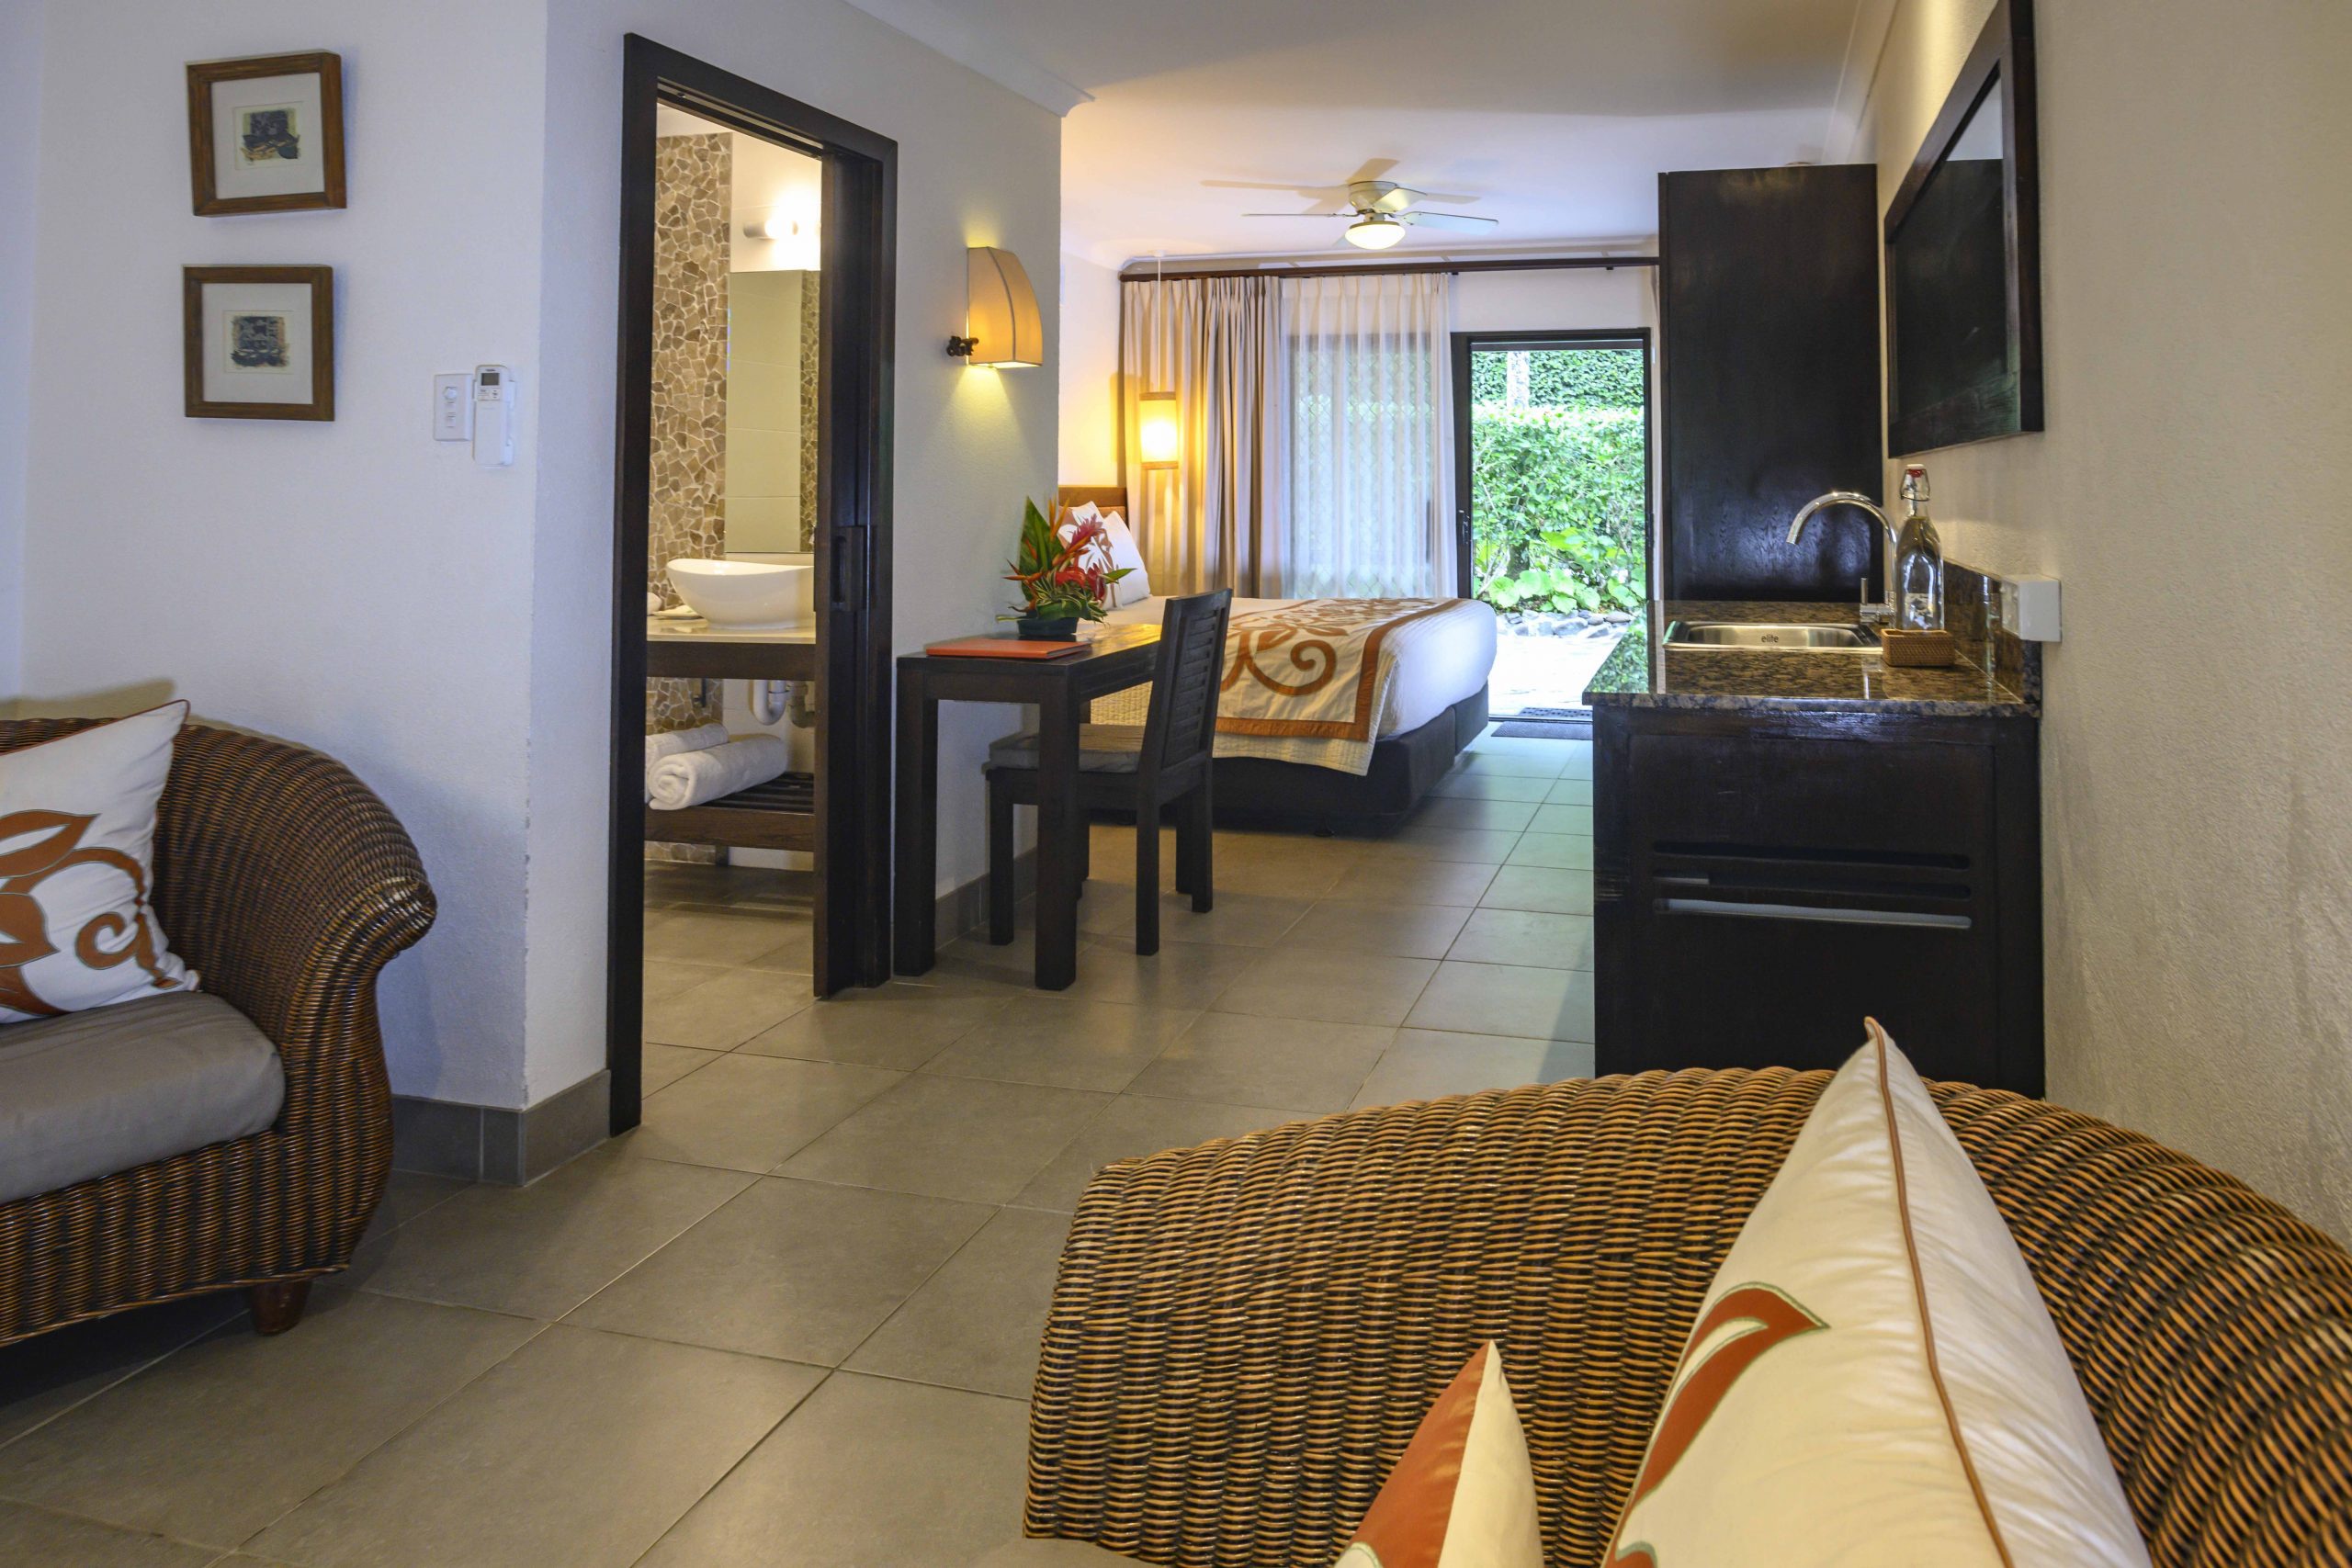 image of a luminous Premium Garden Suite taken from the lounge area featuring a super king bed, a desk and sink also capturing a partial view of the tropical garden in the front yard